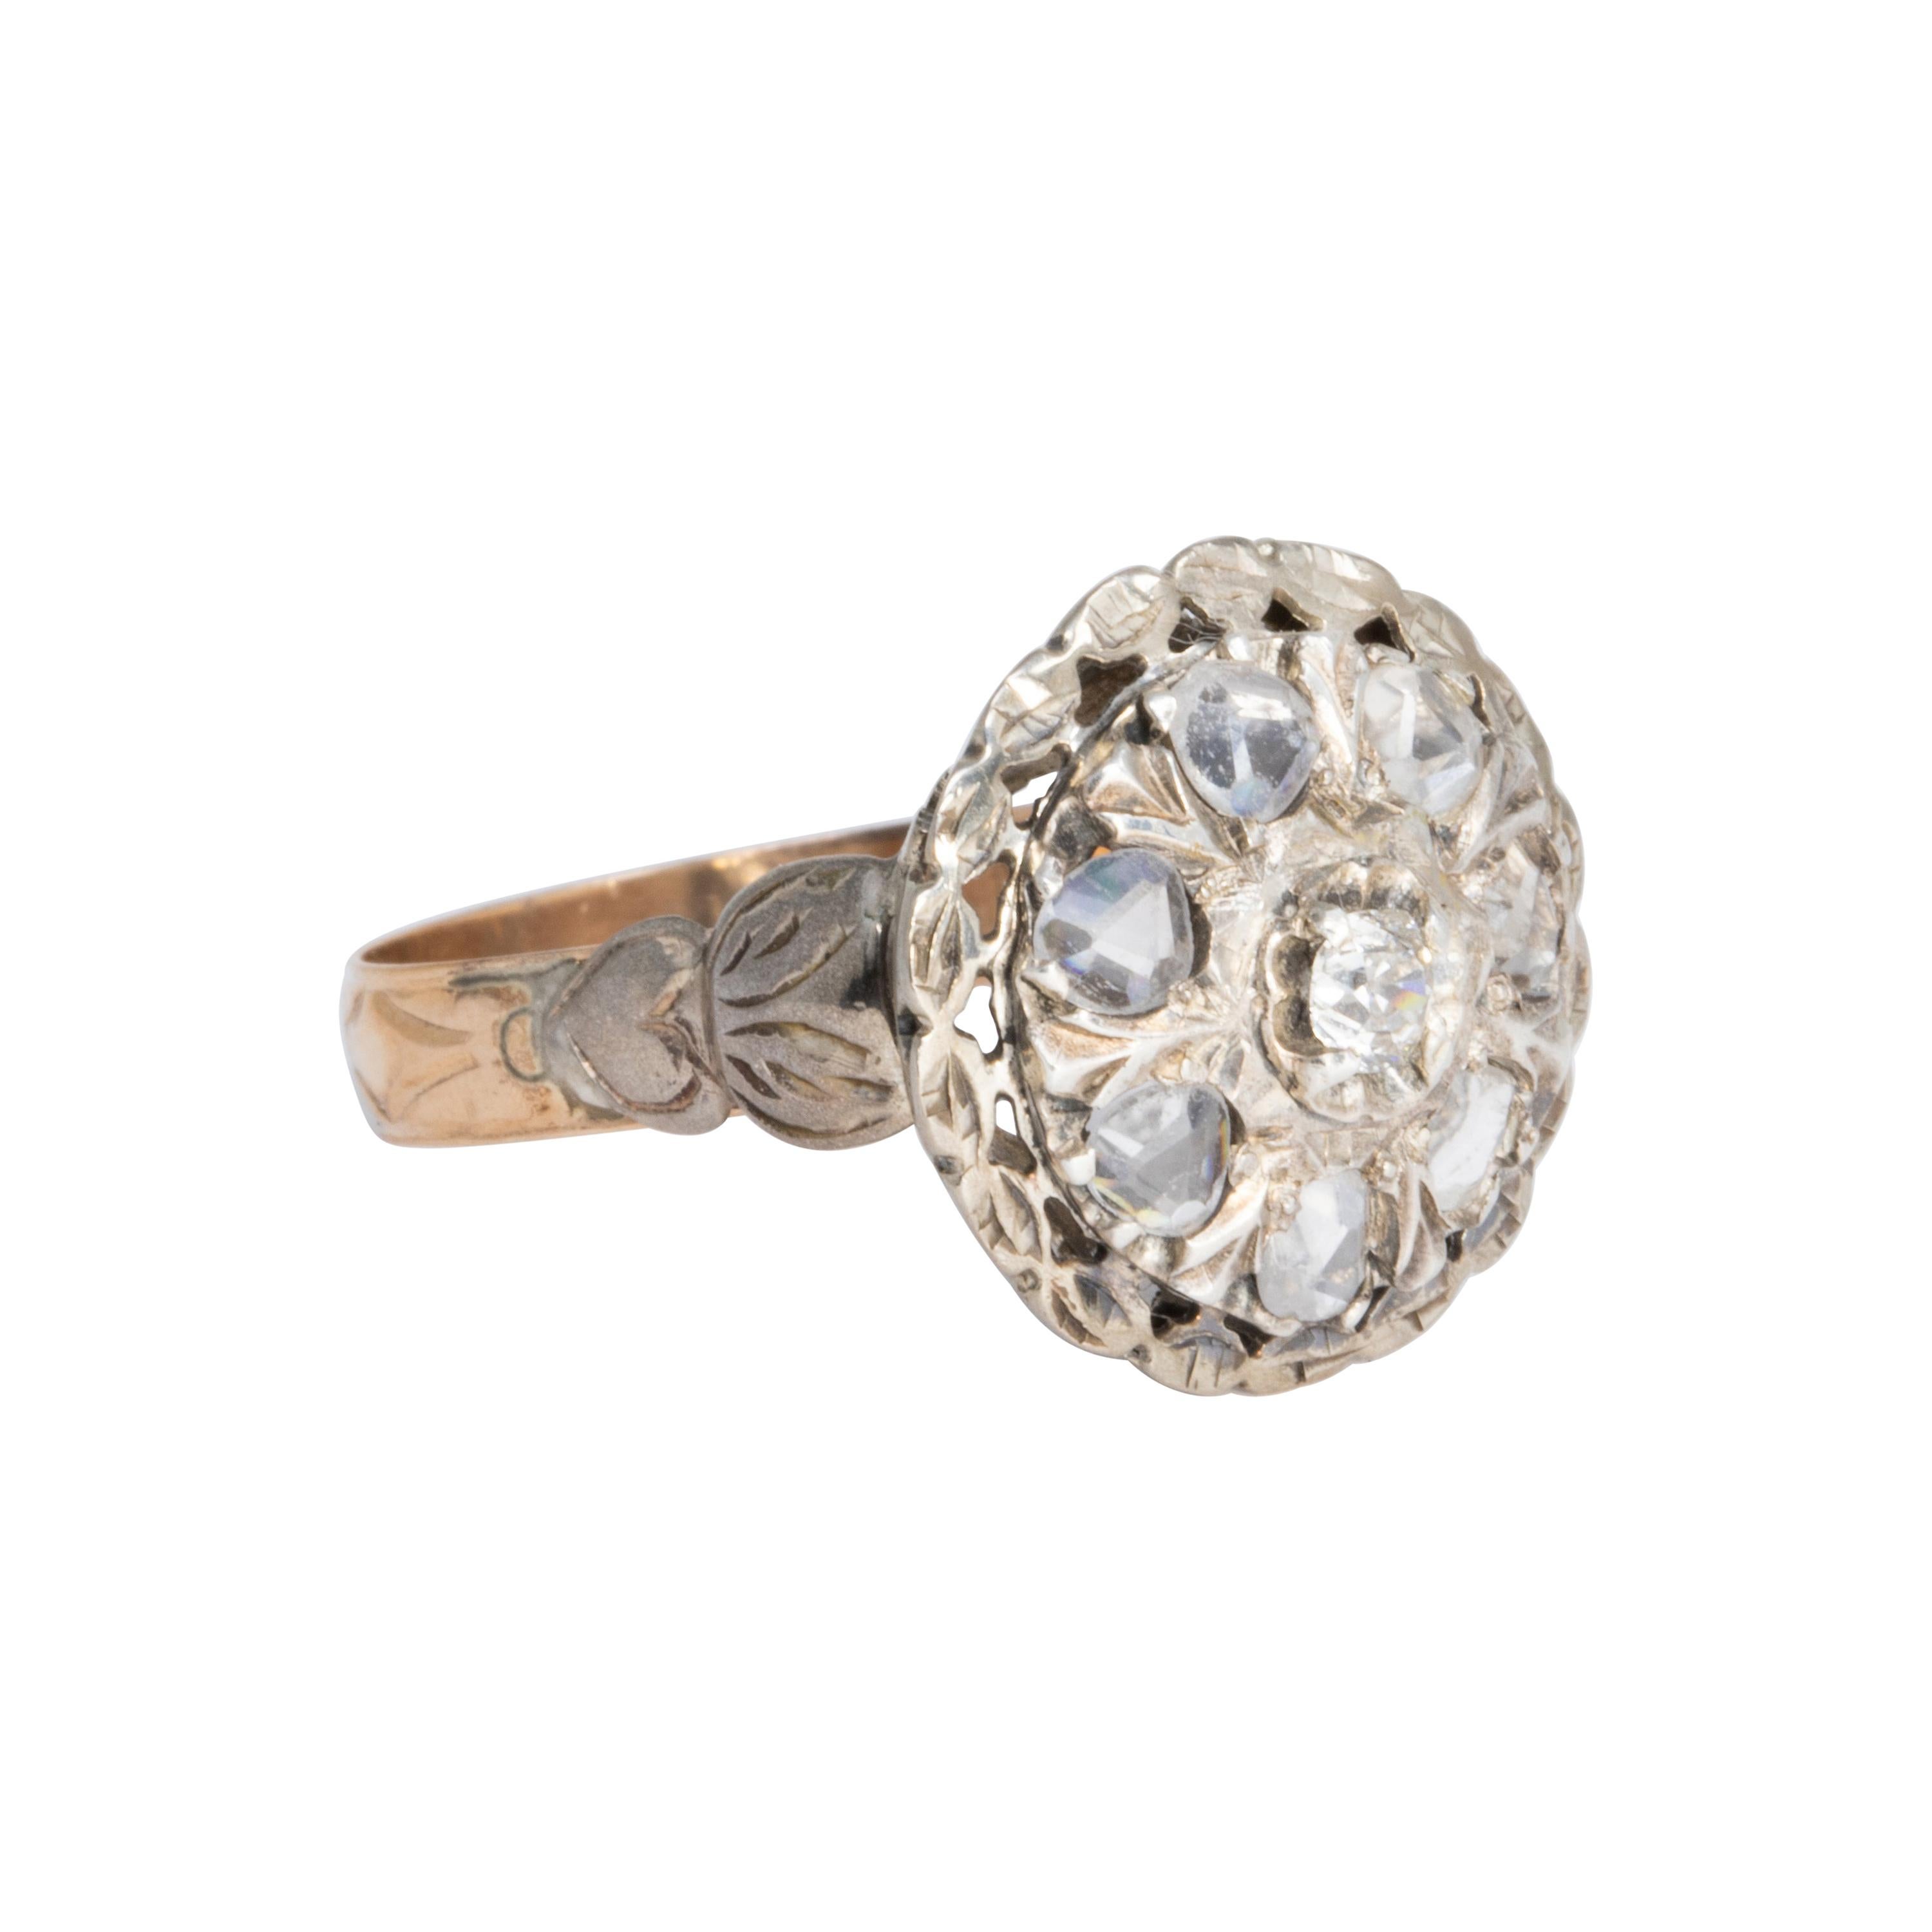 Antique Diamond Halo Ring 10k Gold, Early-Mid 1900s For Sale